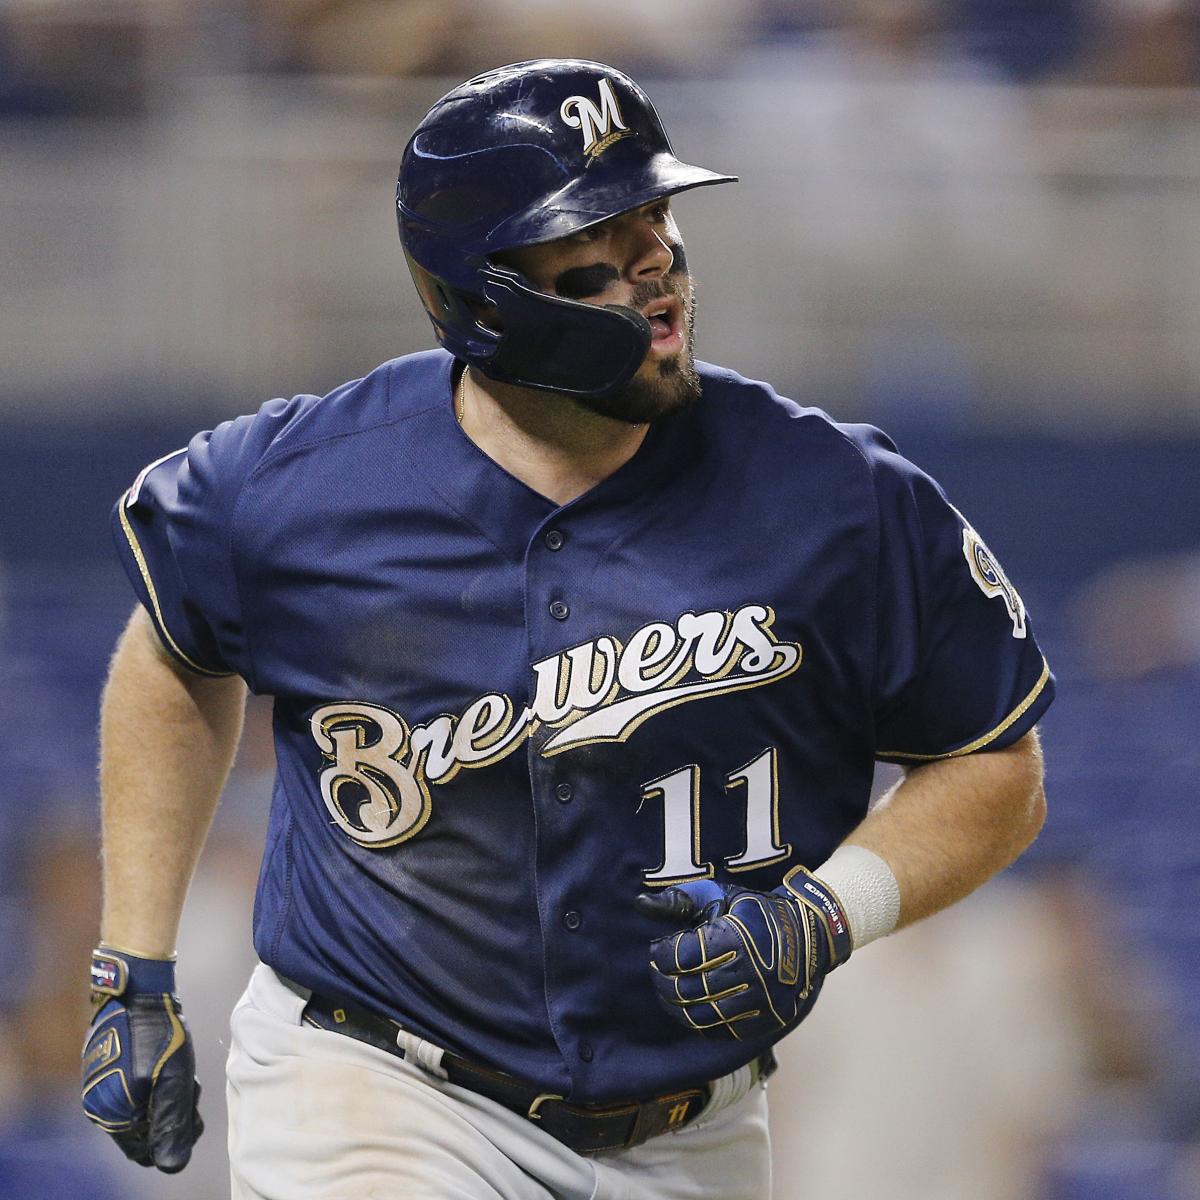 Reds sign All-Star infielder Moustakas to 4-year deal worth $64